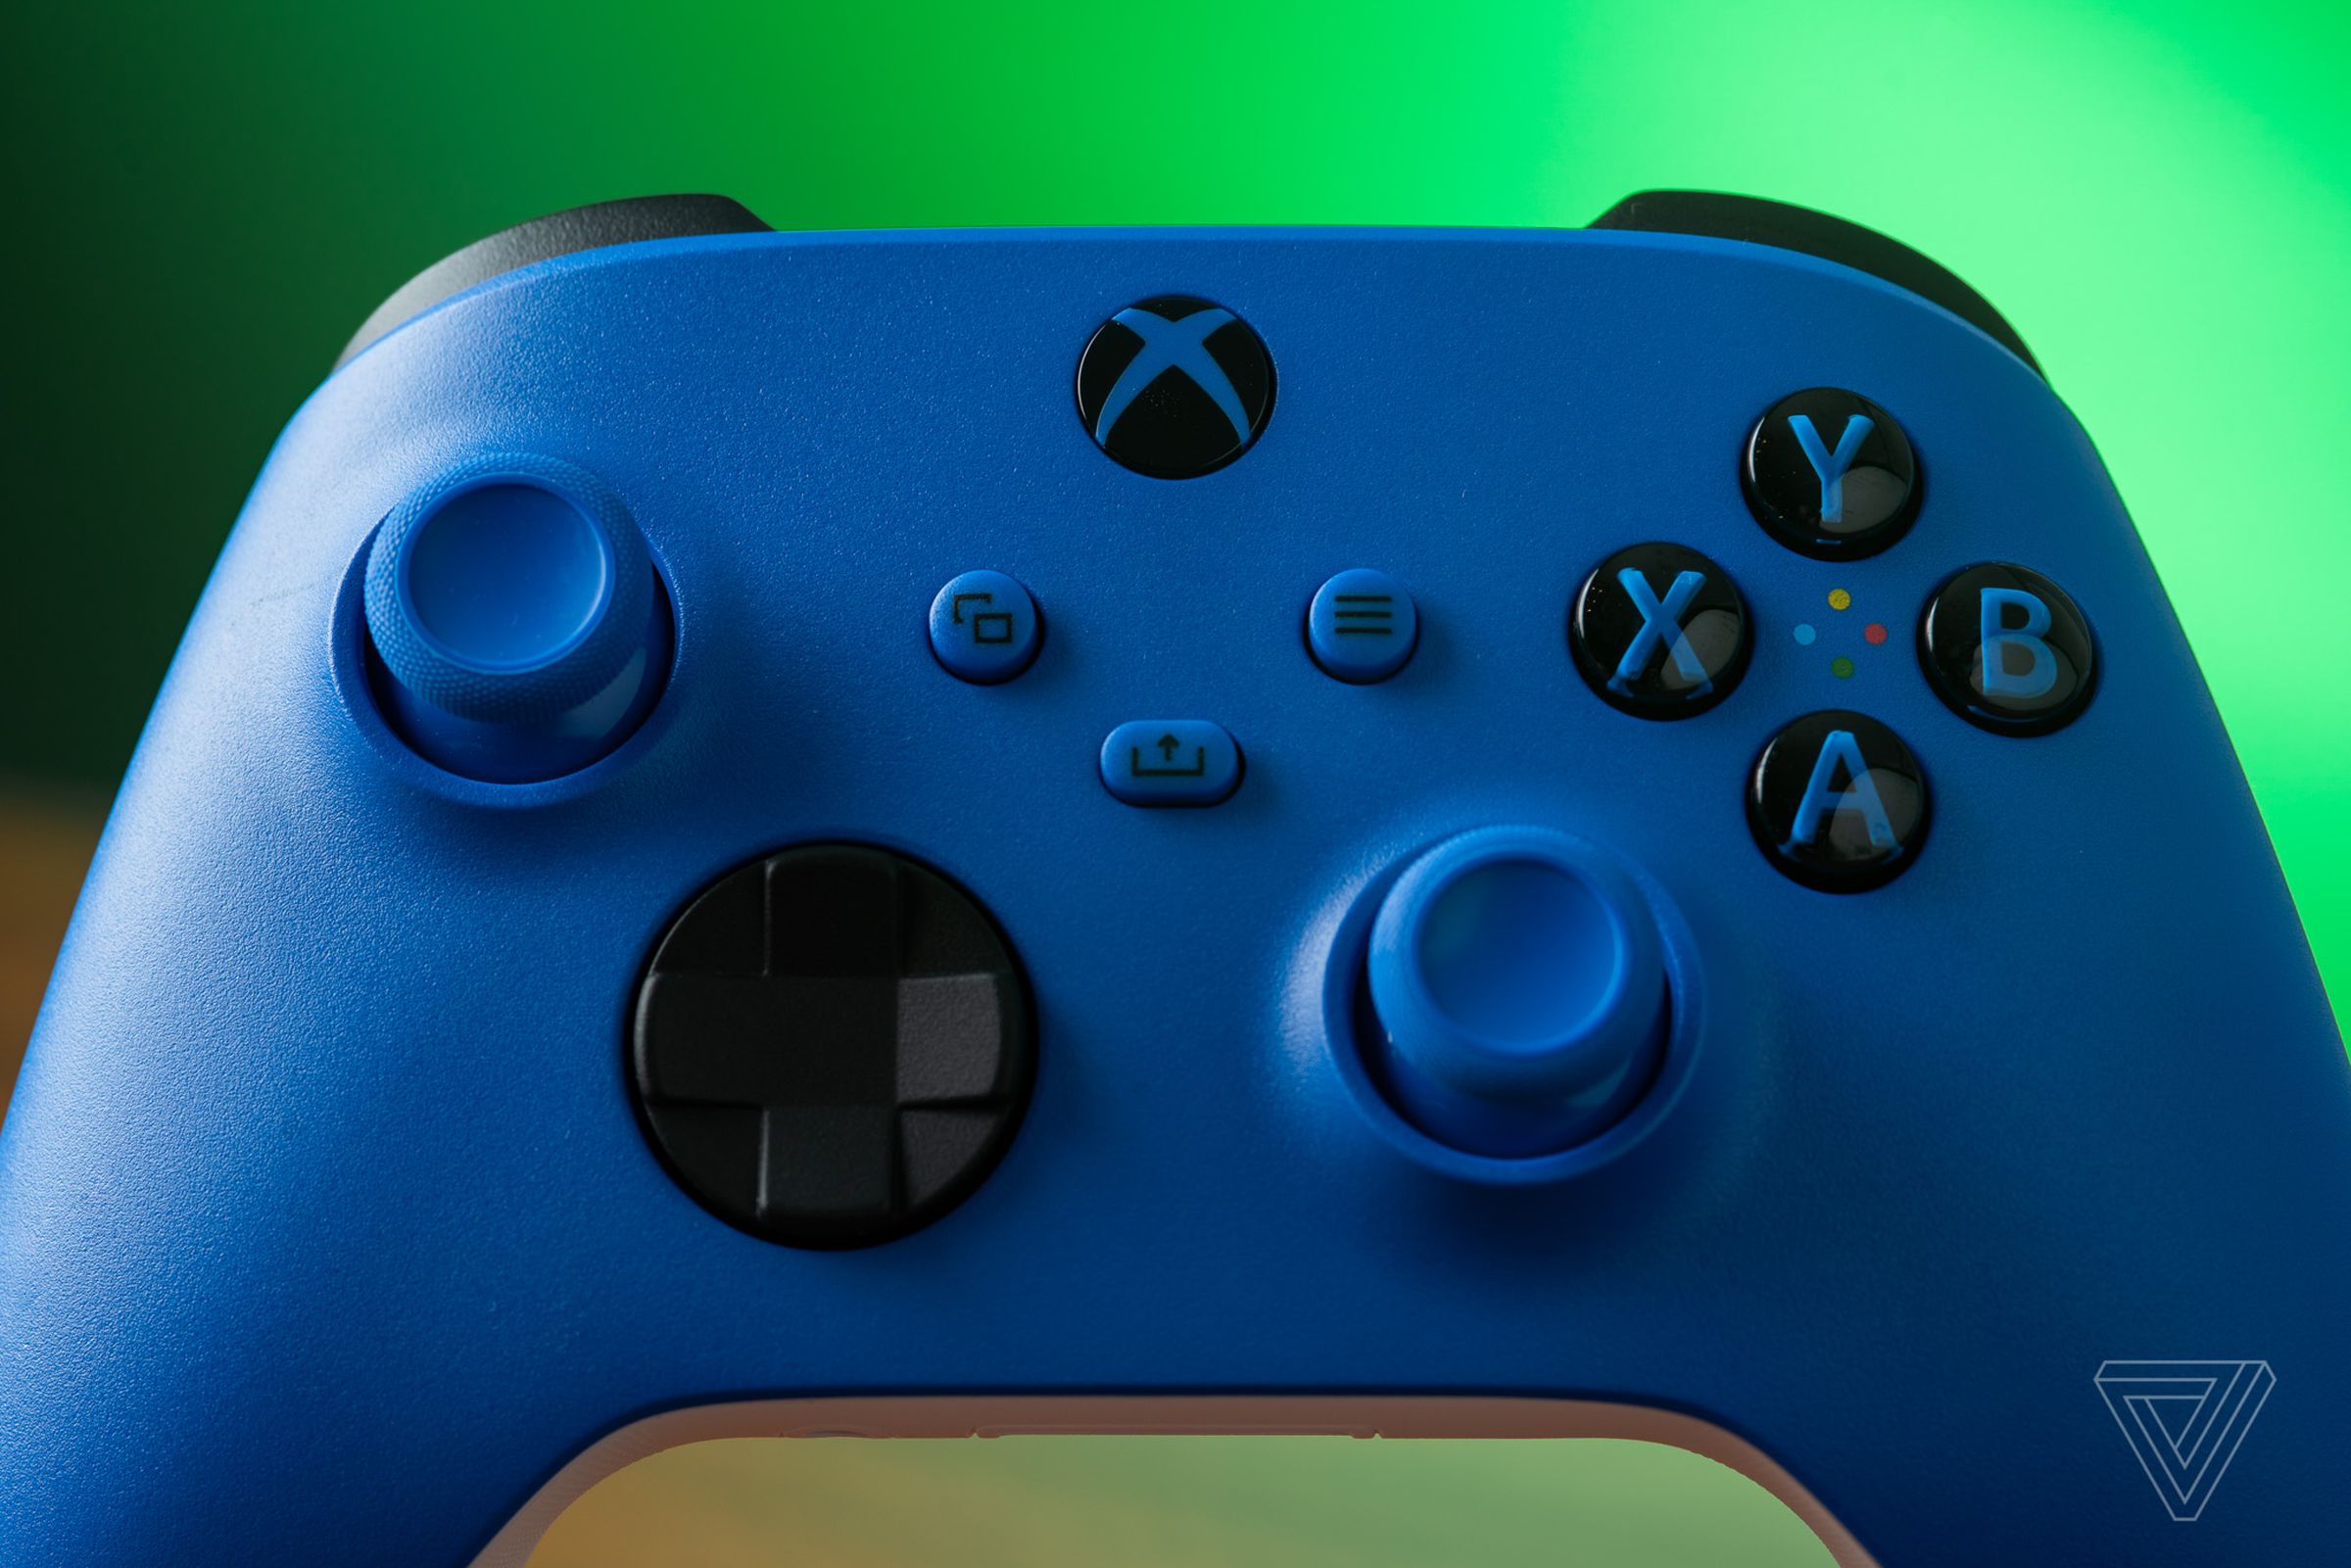 A closeup photo of the Xbox Wireless Controller in blue, showing that the buttons are color-matched to the controller.